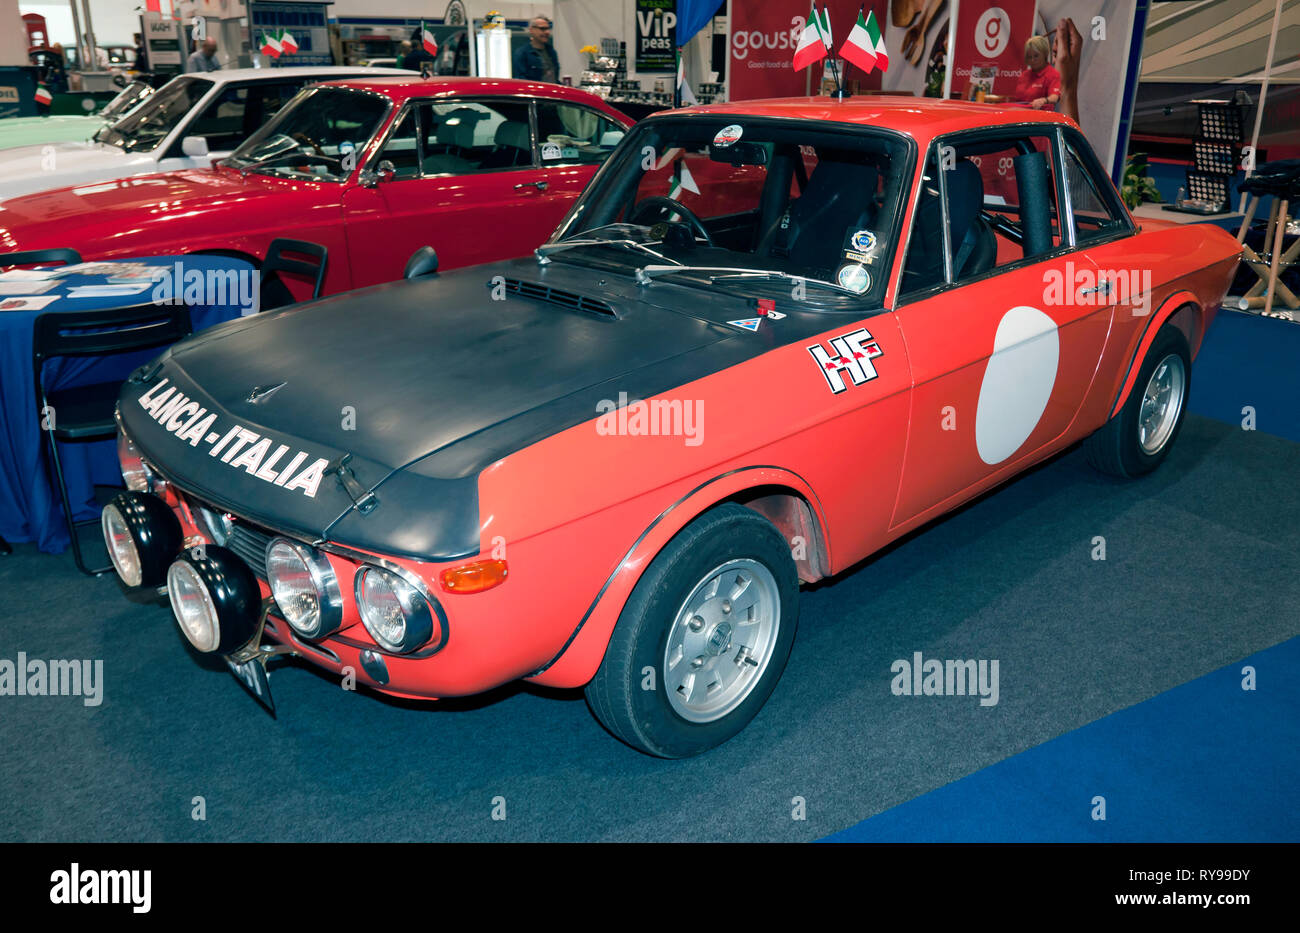 Three-quarter front-view of a Lancia Fulvia 1600 HF on display at the 2019 London Classic Car Show Stock Photo